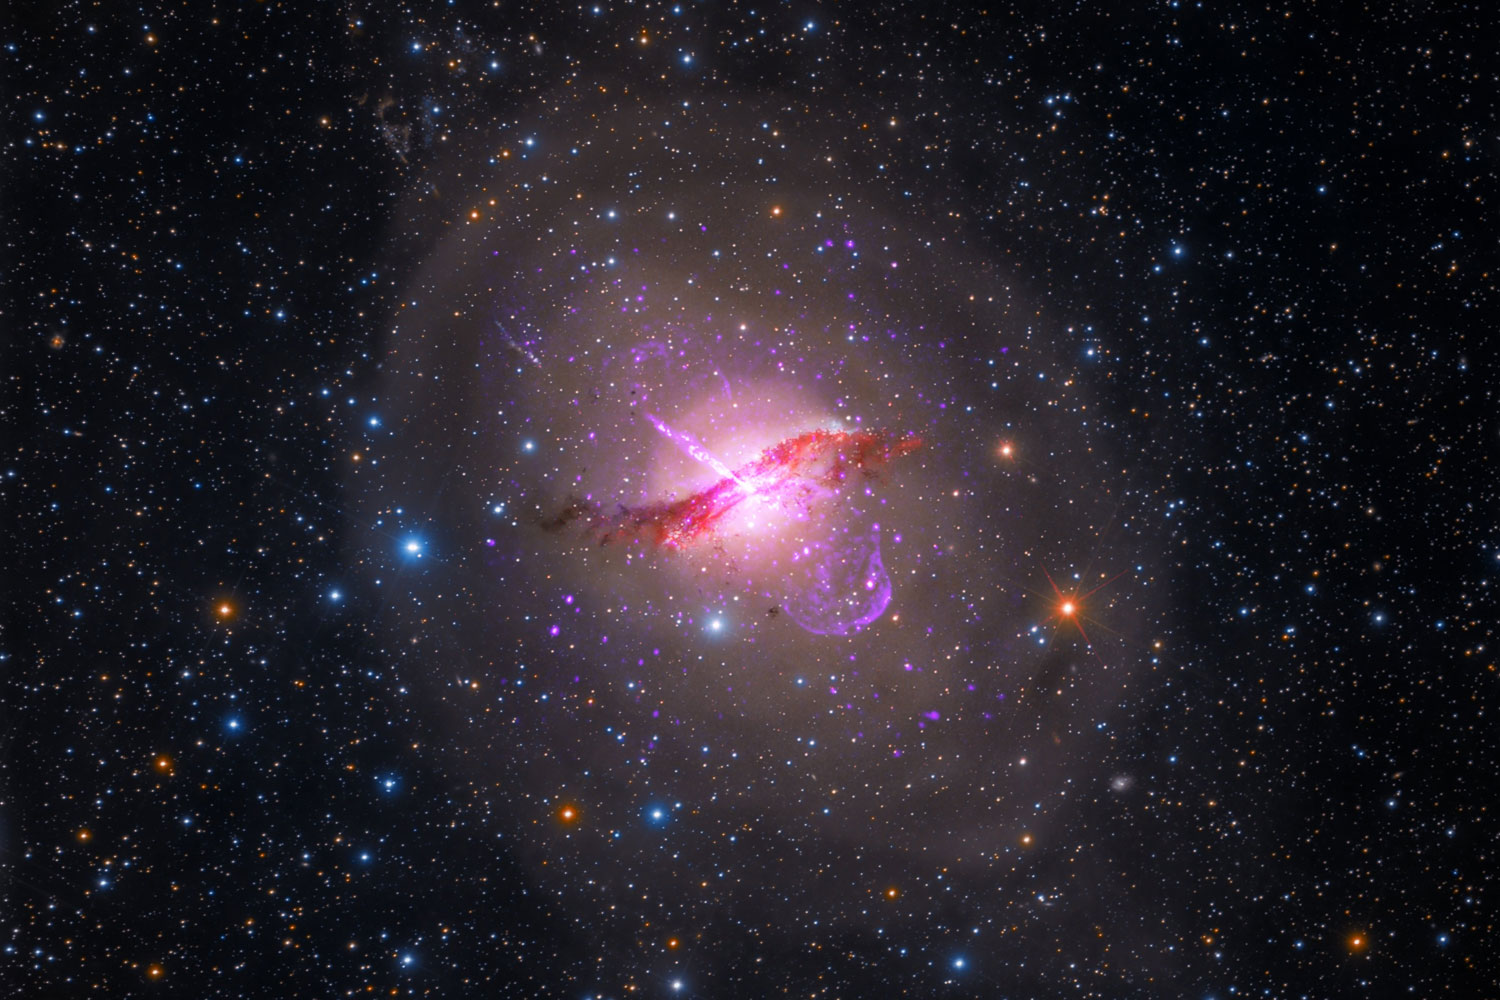 Centaurus A is the fifth brightest galaxy in the sky is famous for the dust lane across its middle and a giant jet blasting away from the supermassive black hole at its center. It is an active galaxy about 12 million light years from Earth.